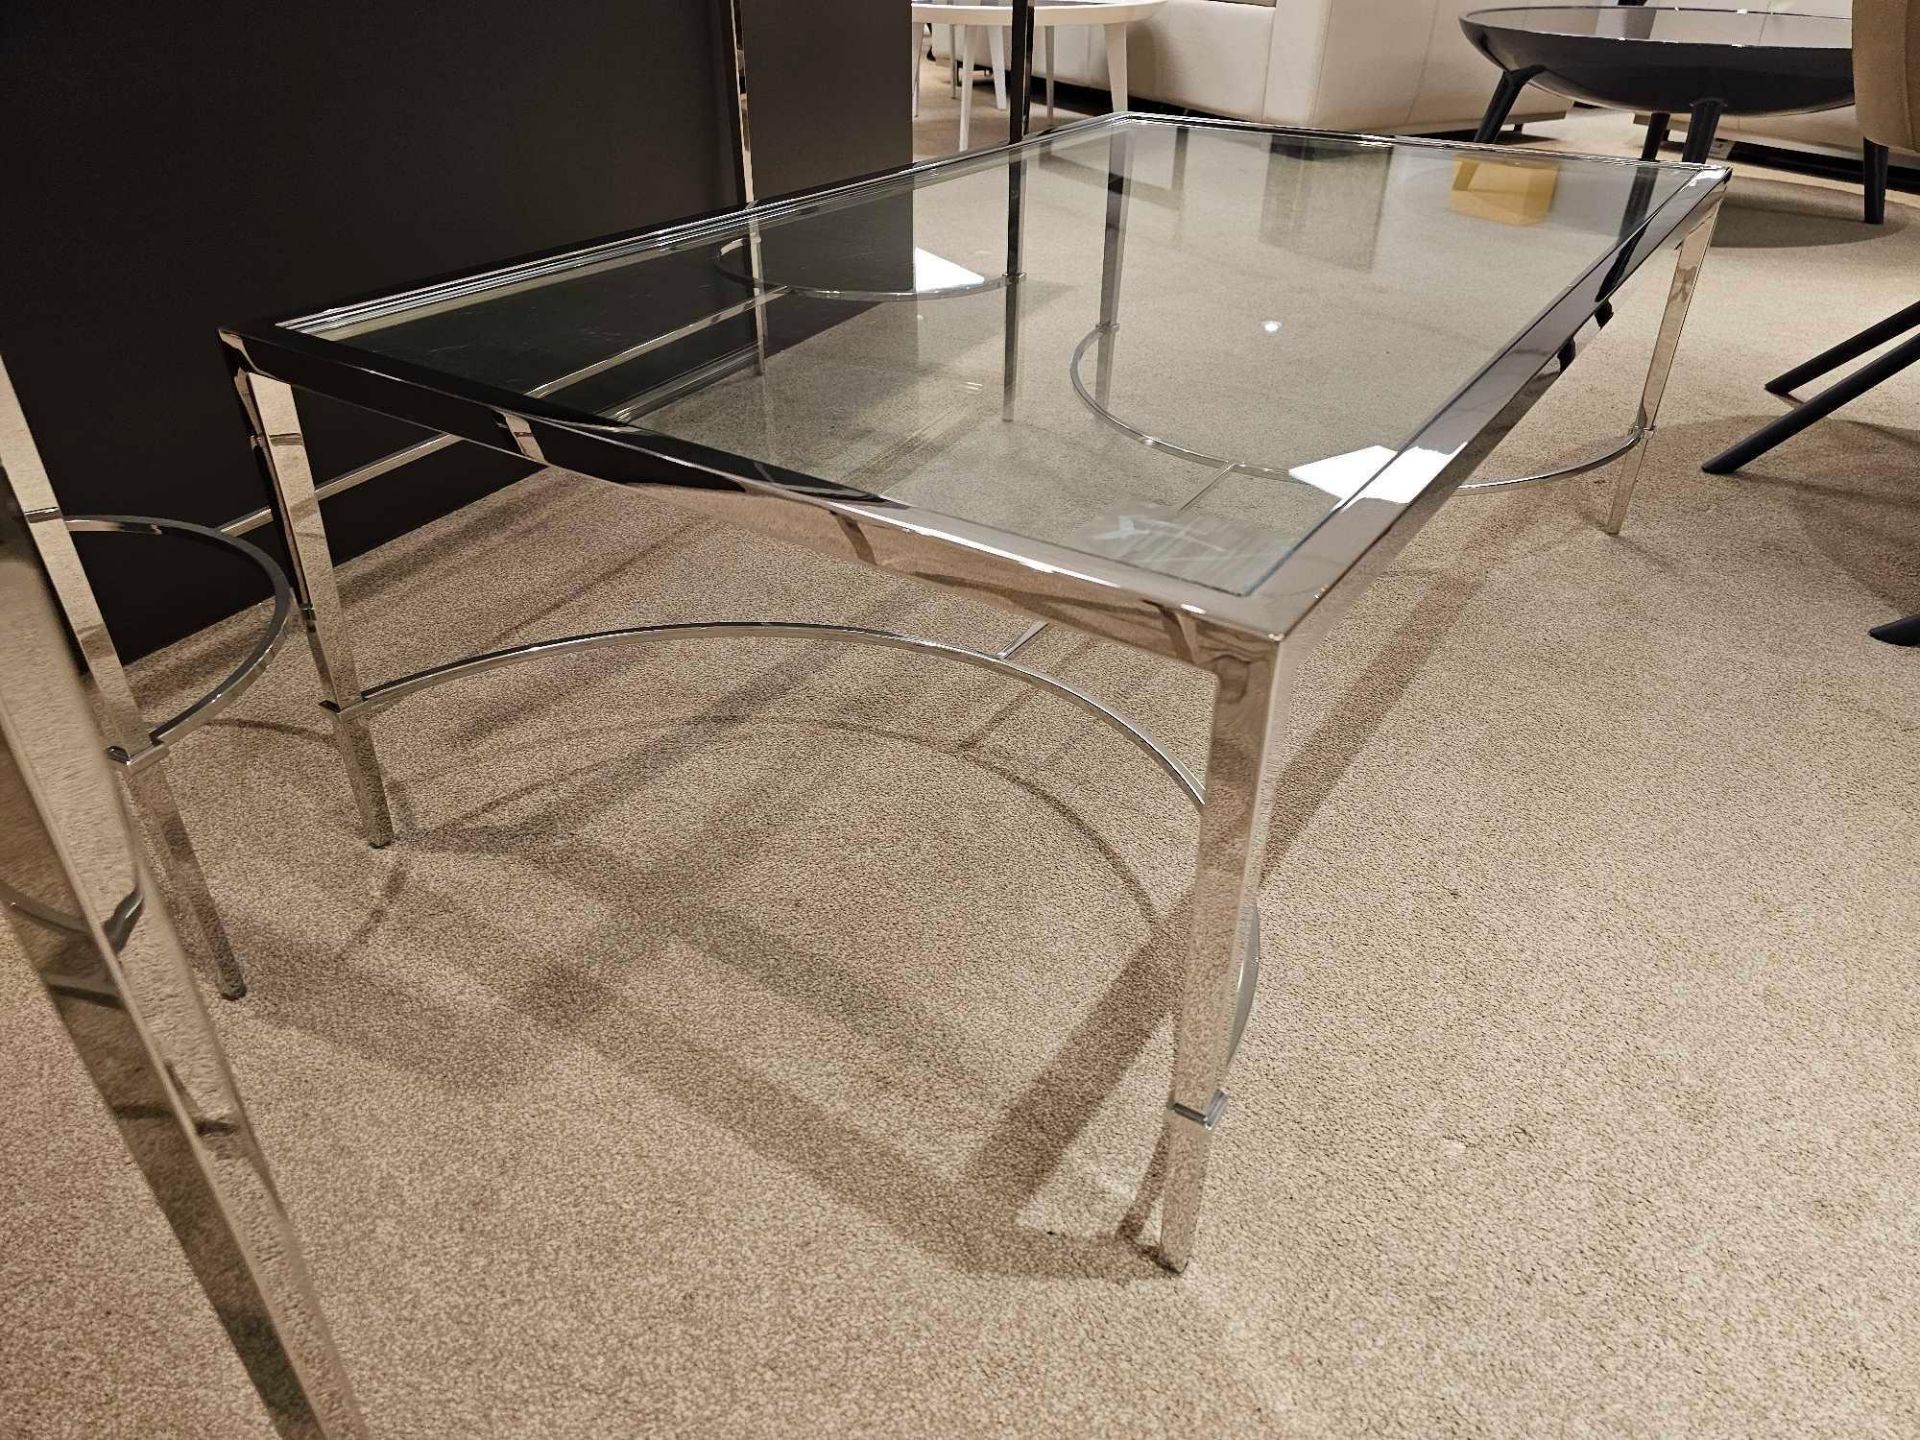 Tokyo Coffee Table by Kesterport The Tokyo coffee table with its clear glass top and a refined - Bild 3 aus 6